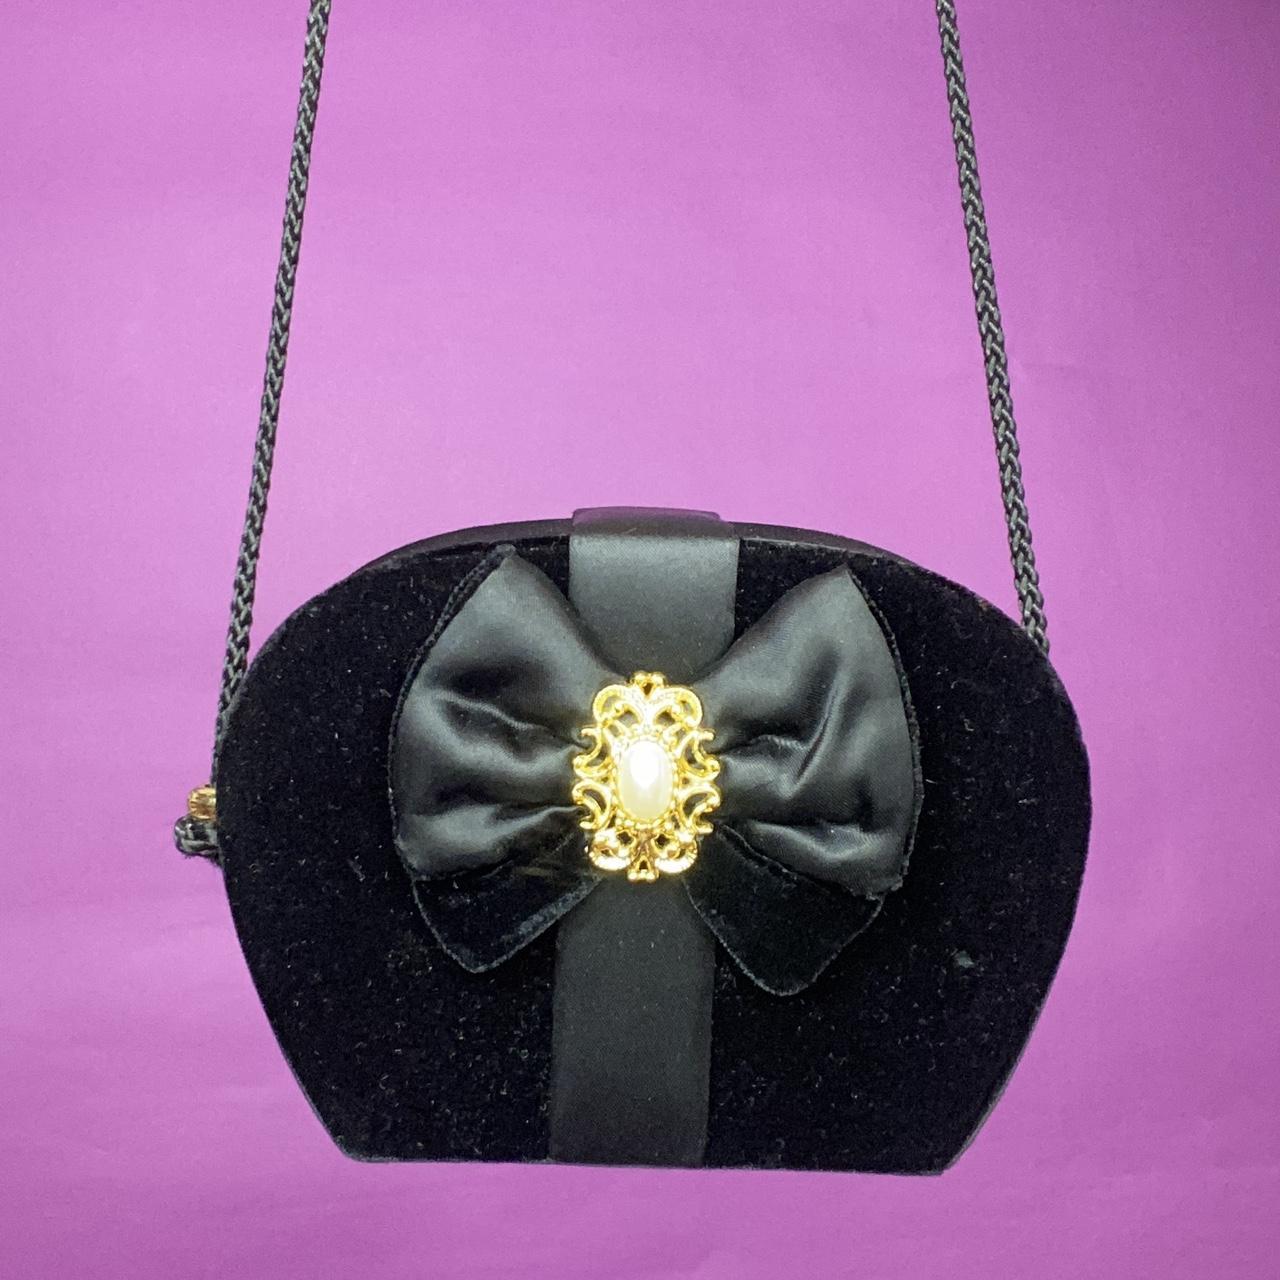 Product Image 1 - 90s goth black velvet purse

by